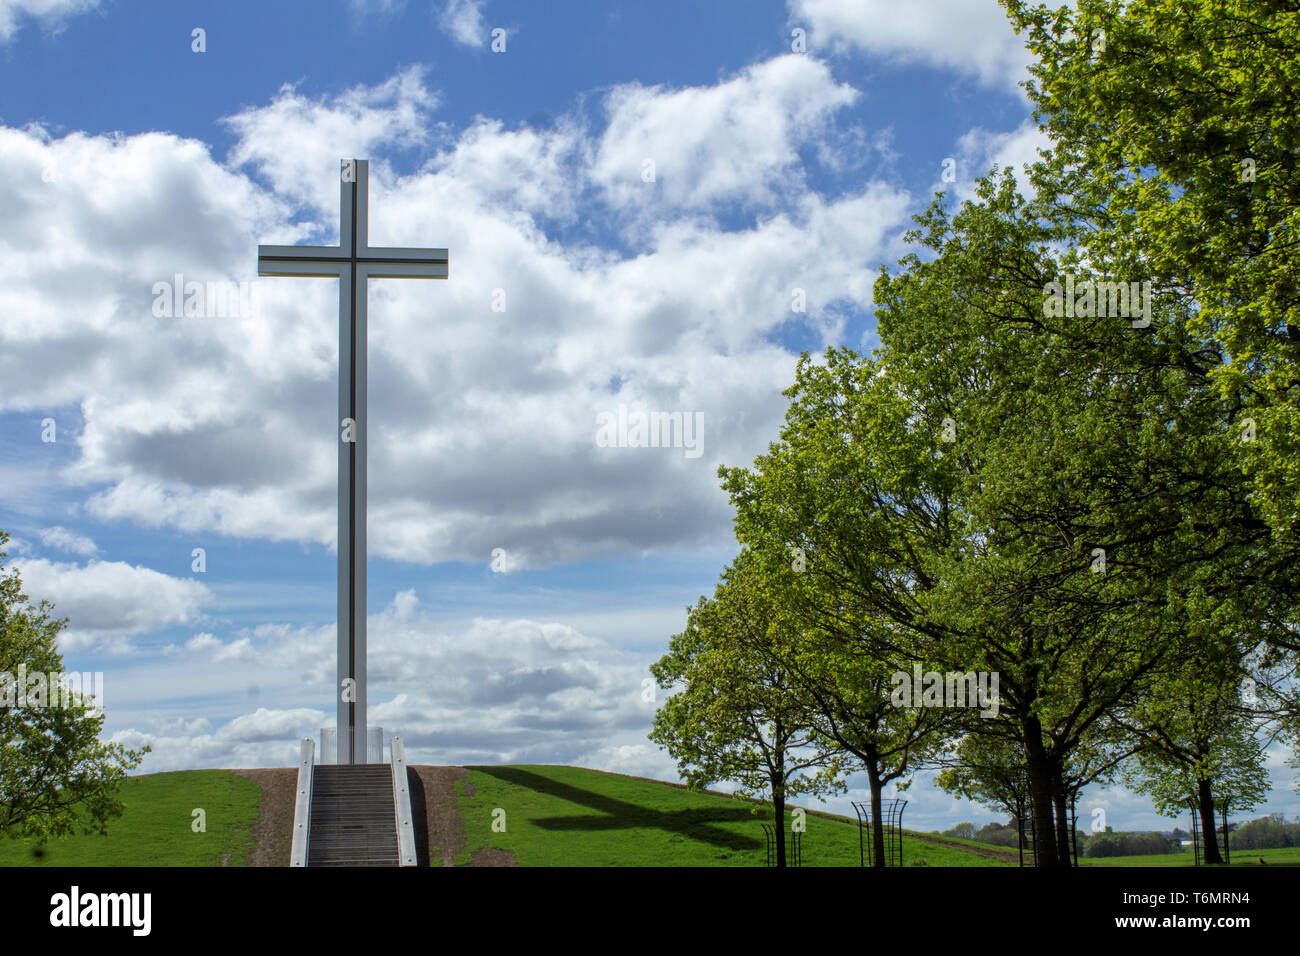 The Papal Cross in Dublin’s Phoenix Park where Pope John Paul II celebrated mass in 1979 and Pope Francis celebrated mass in 2018. Stock Photo